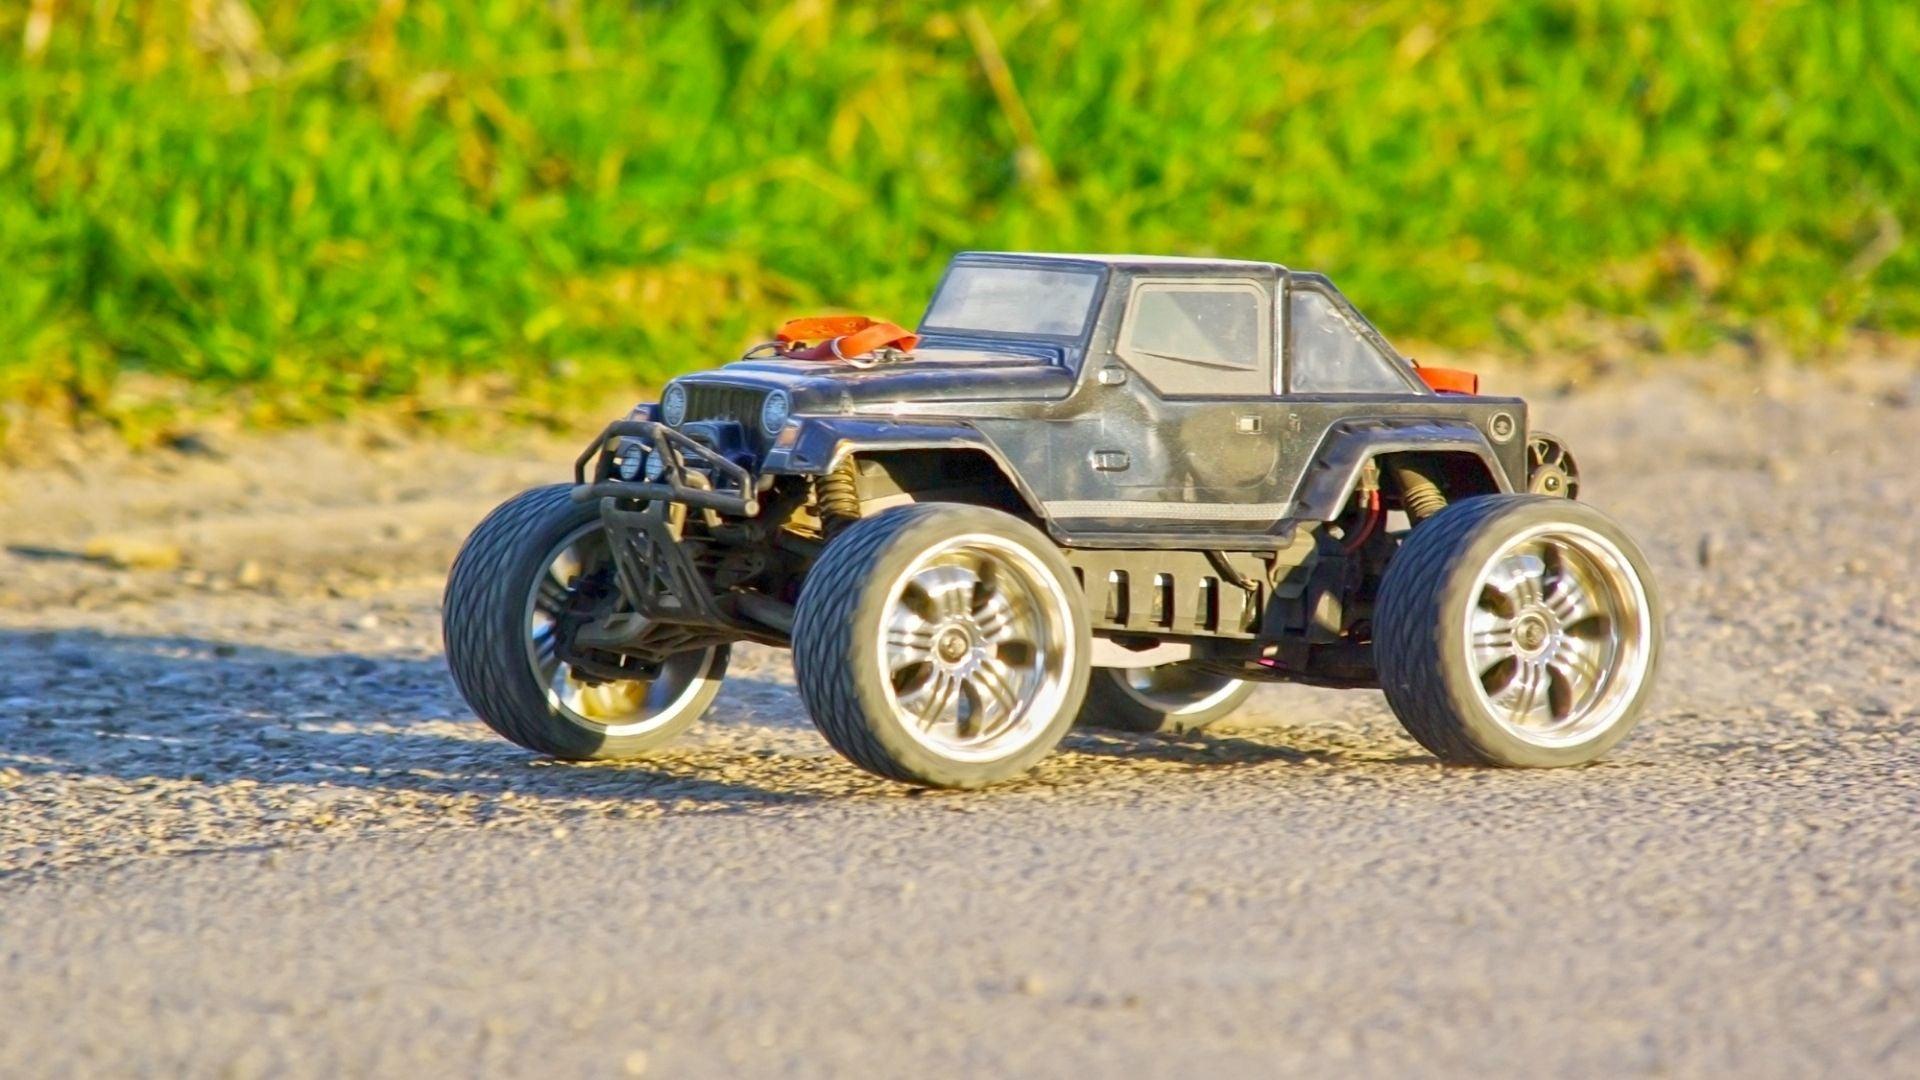 Best Place To Buy Rc Cars: Local hobby shops: your go-to for the best RC cars.